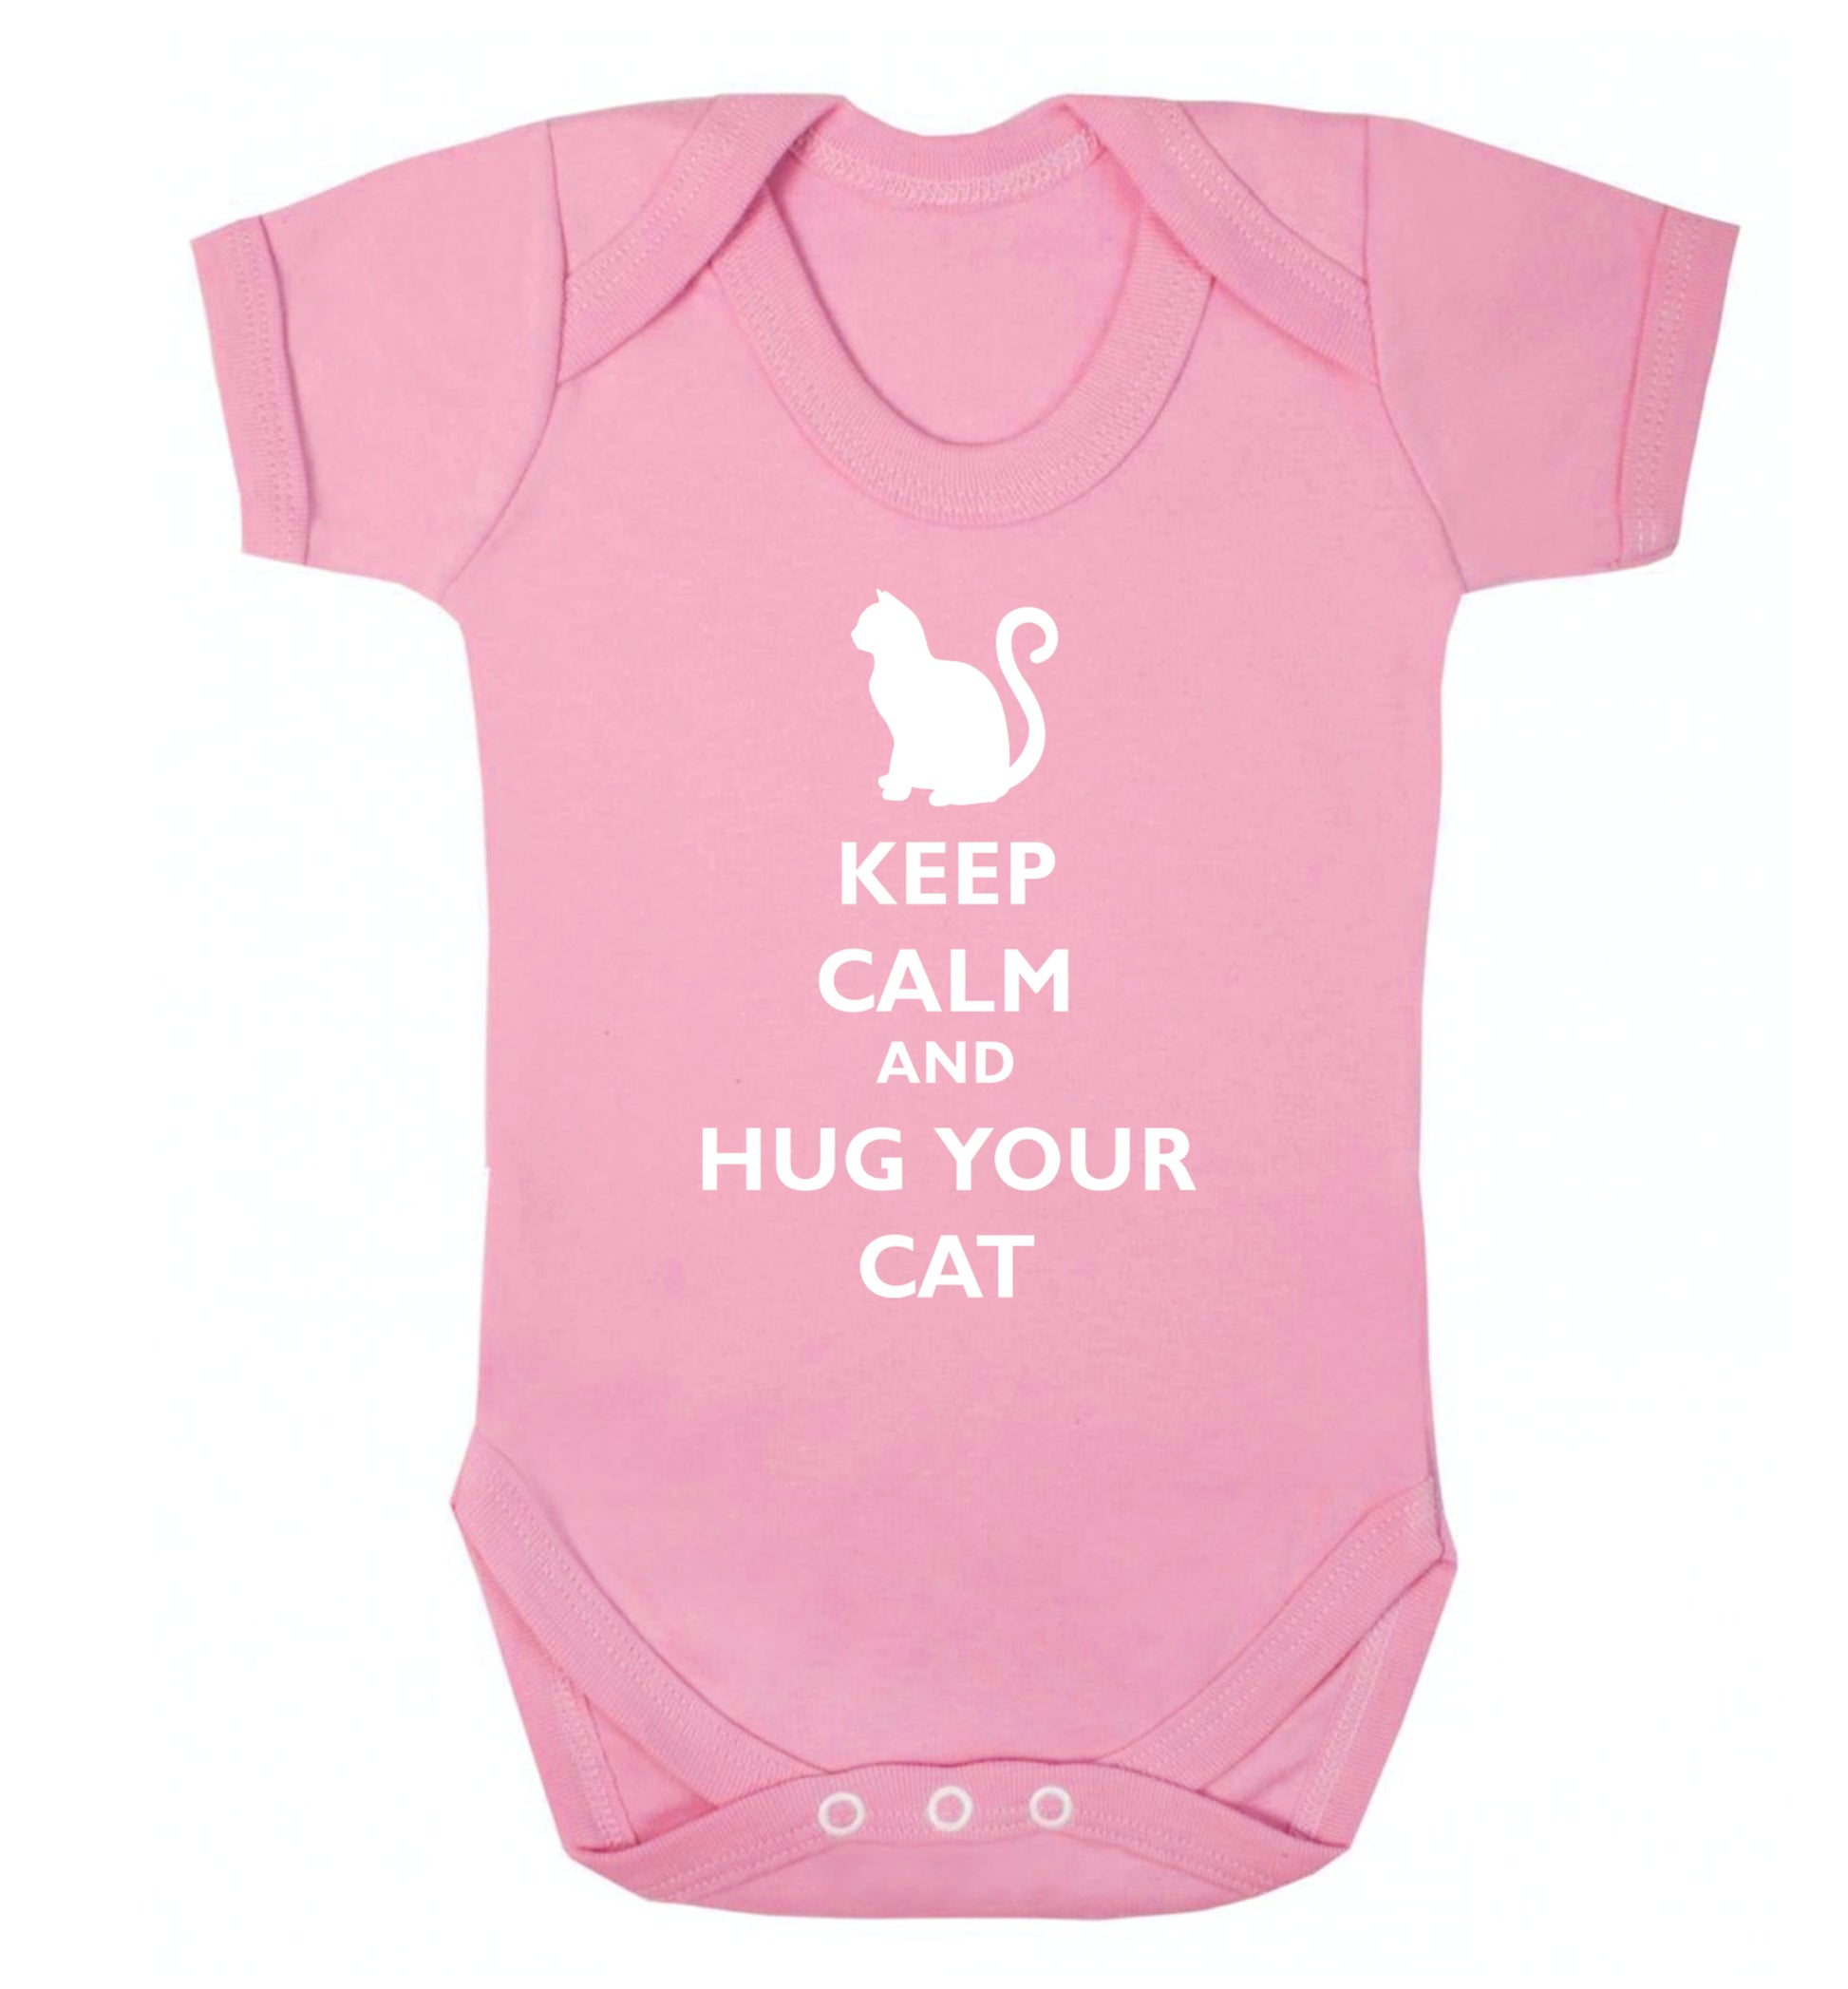 Keep calm and hug your cat Baby Vest pale pink 18-24 months